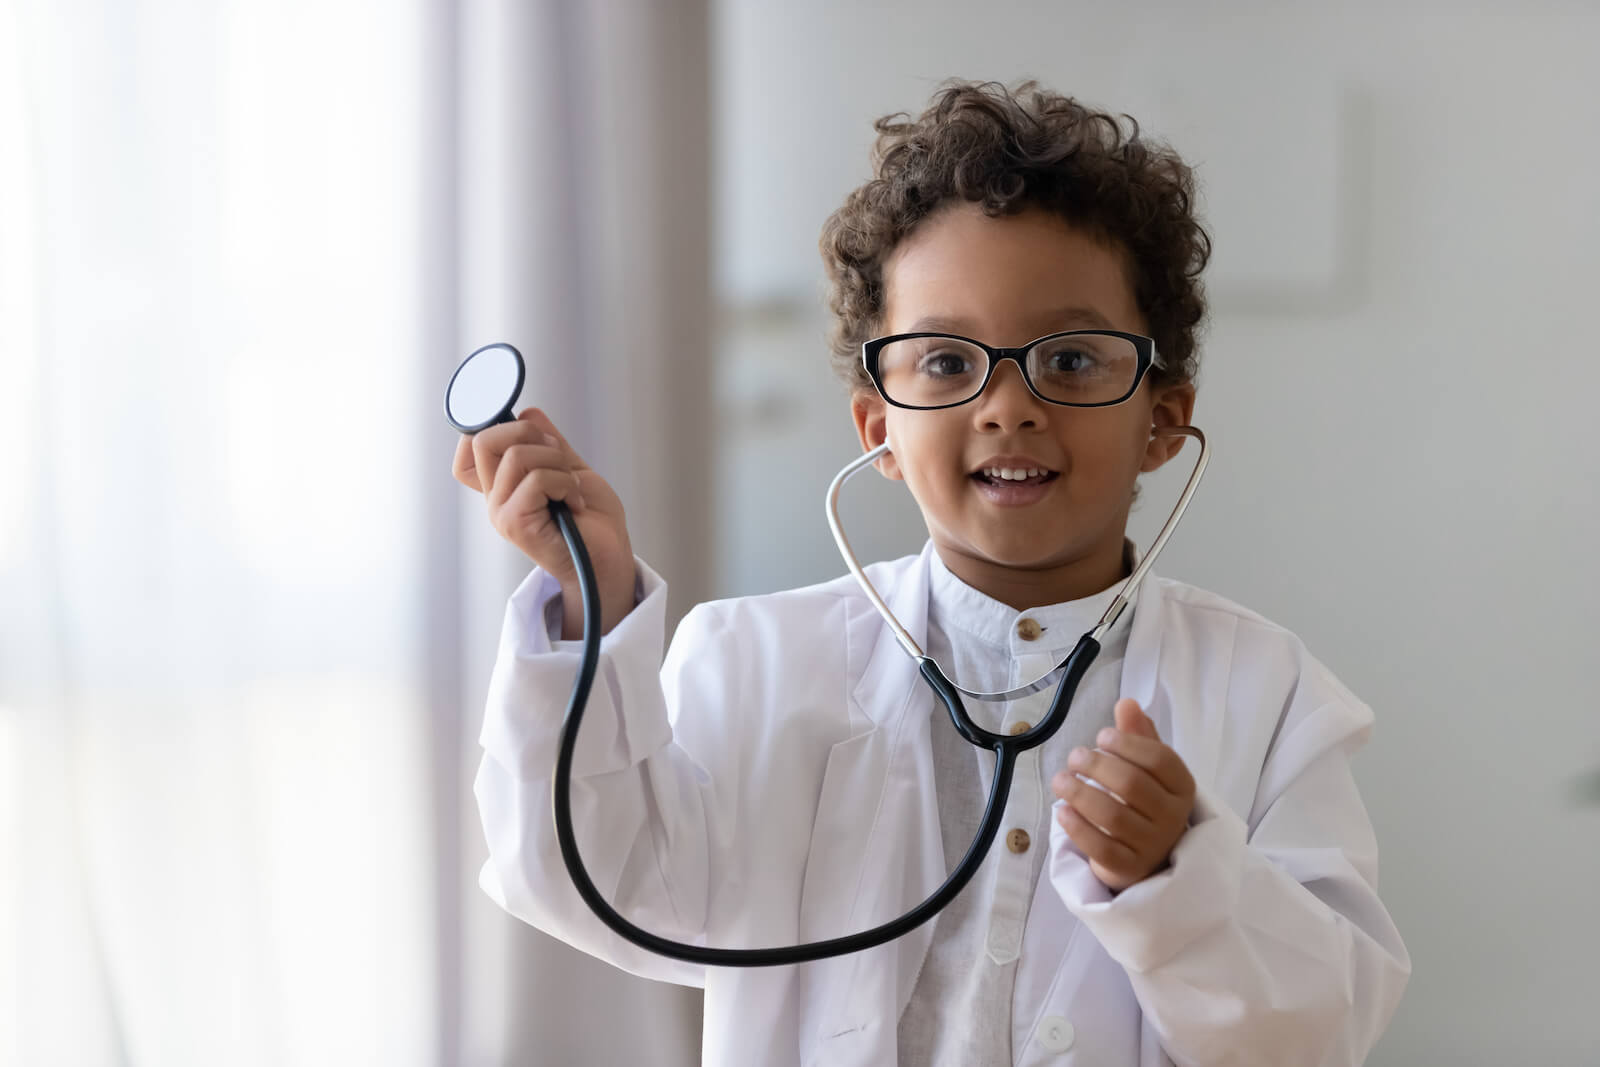 Kids probiotic: kid dressed up as a doctor holding a stethoscope